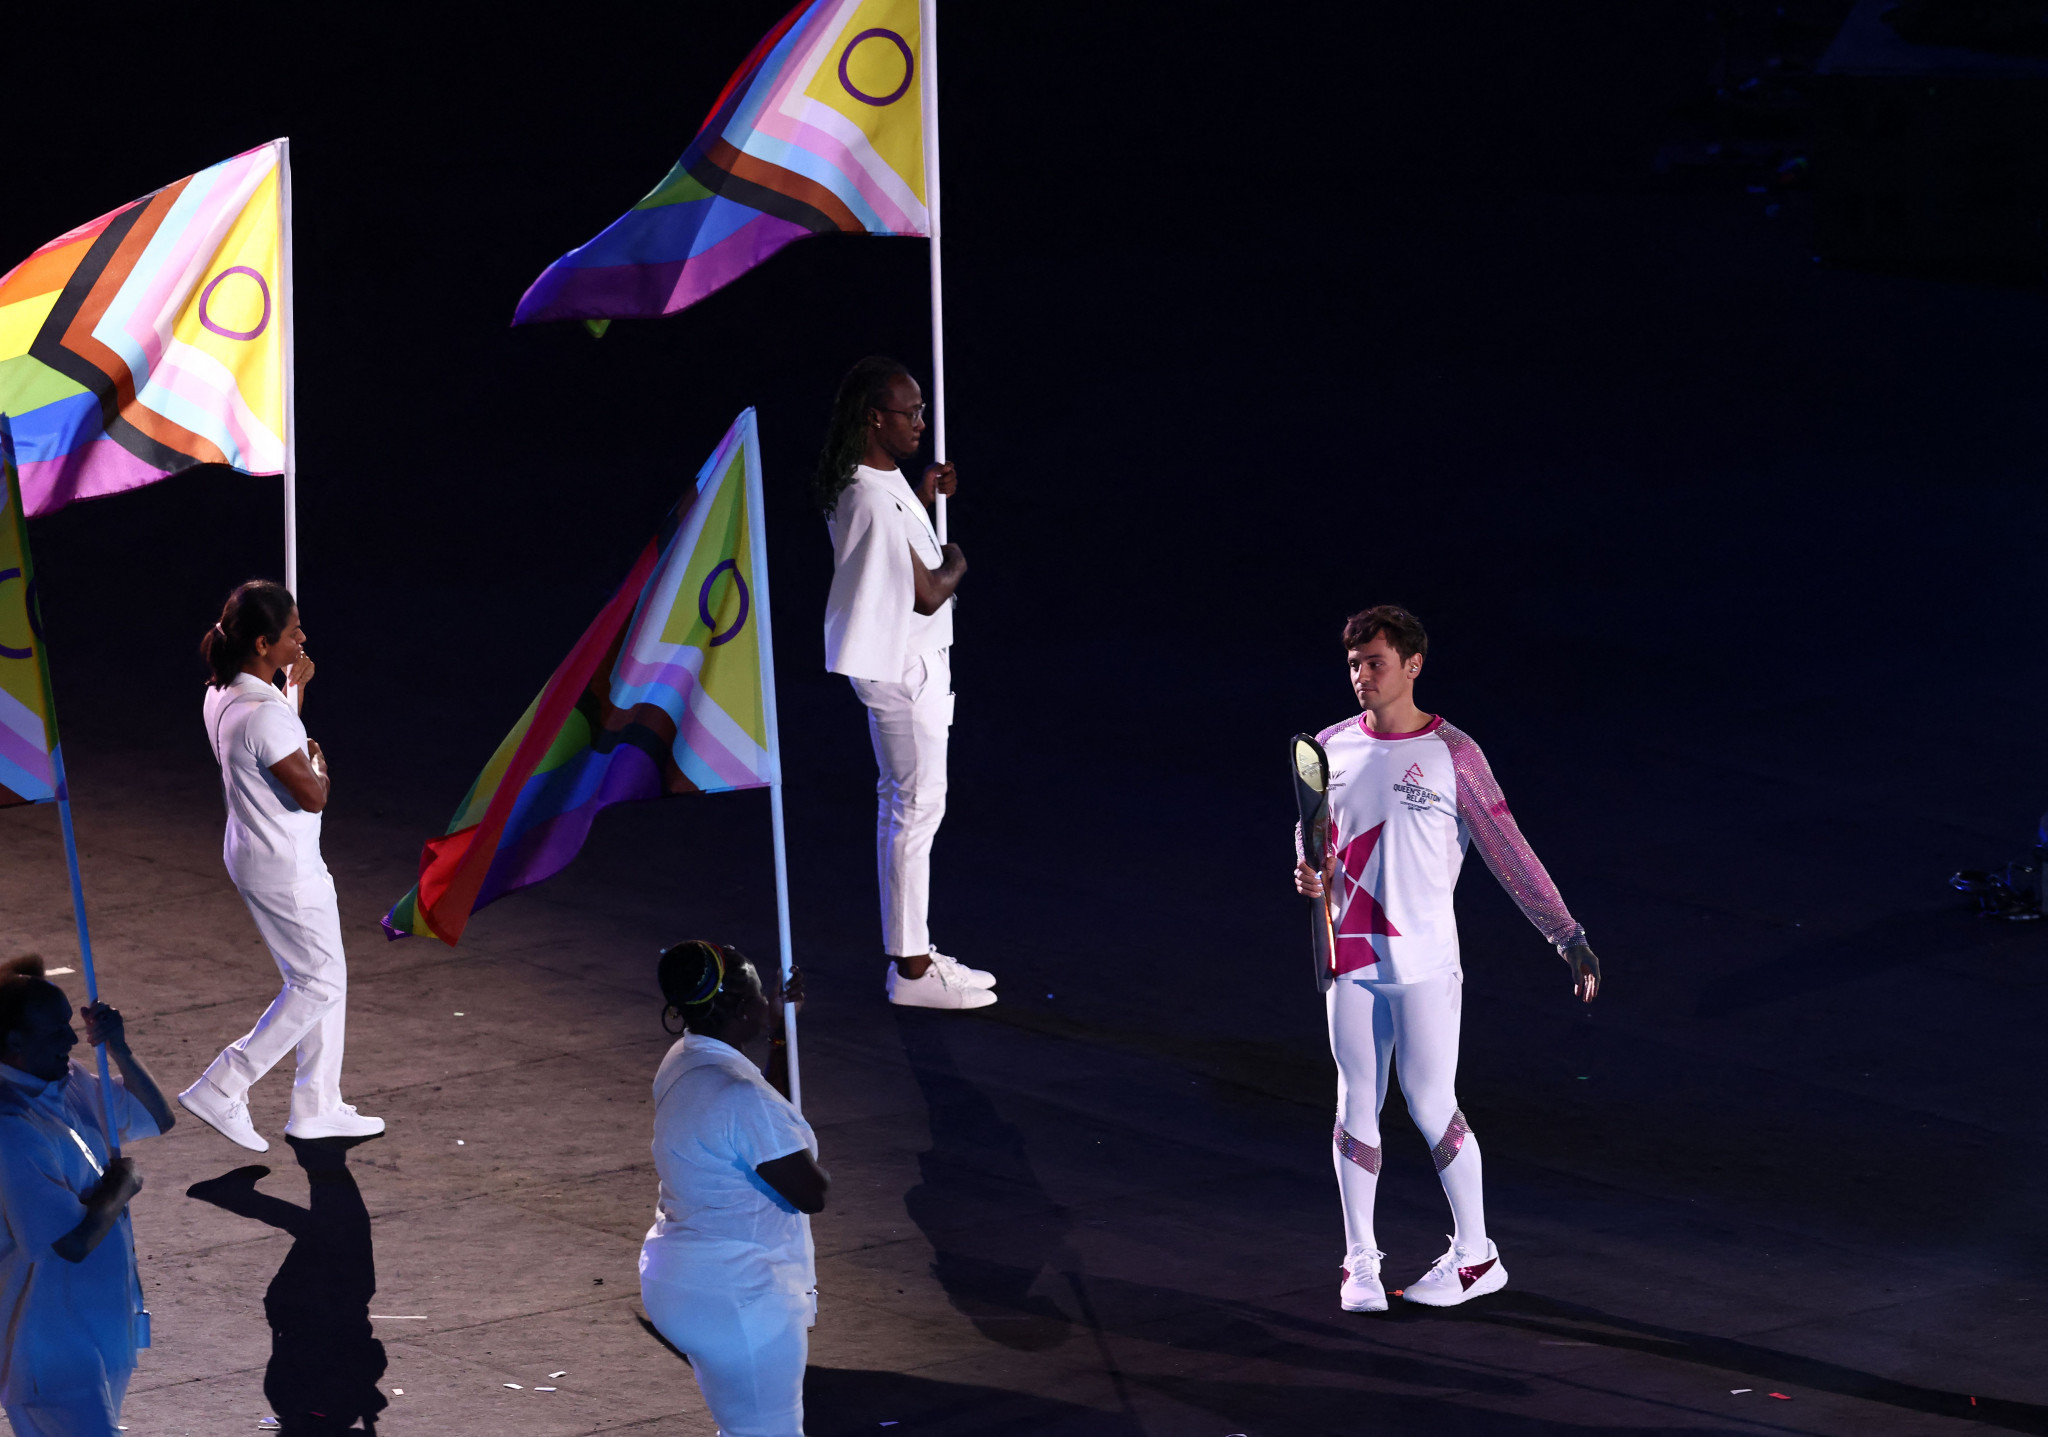 English diver Tom Daley, furthest right, used the Birmingham 2022 Opening Ceremony to raise awareness of LGBTQ+ rights across the Commonwealth ©Getty Images